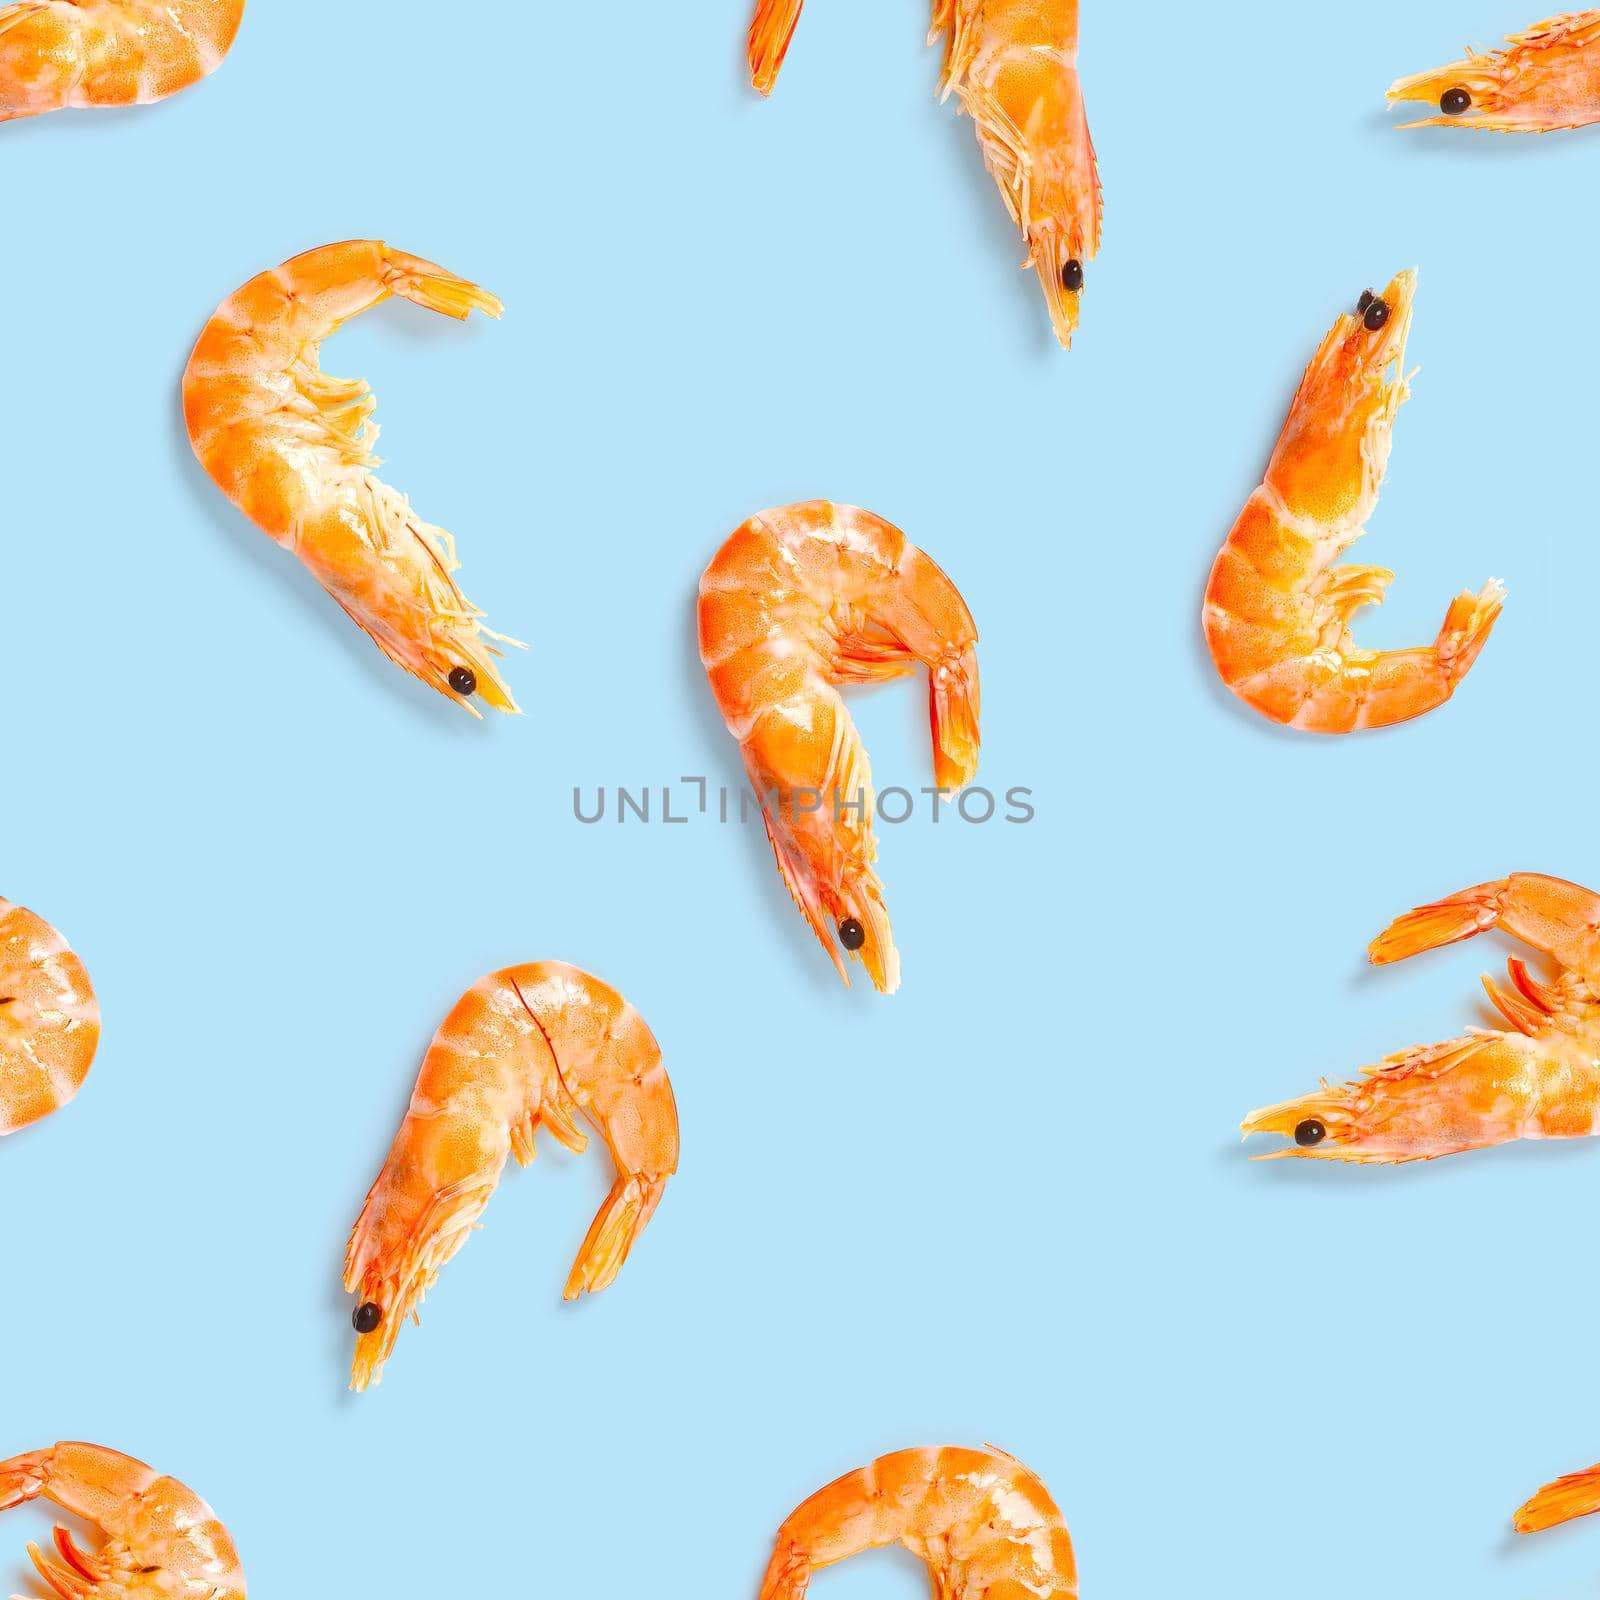 Tiger shrimp. Seamless pattern made from Prawn isolated on a blue background. Seafood seamless pattern with shrimps. seafood pattern by PhotoTime